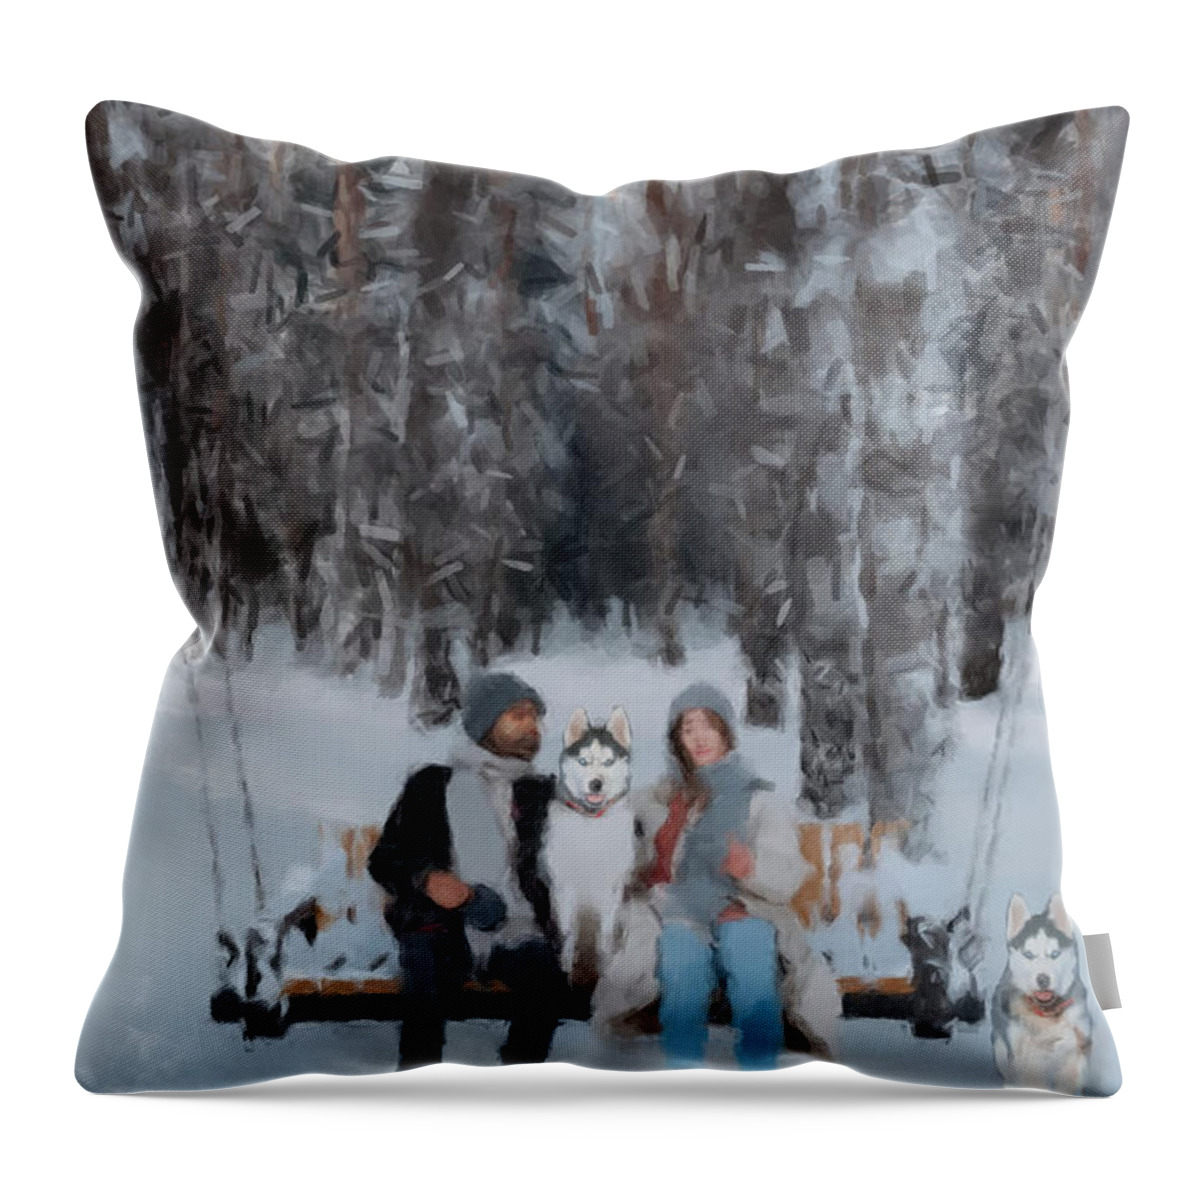 Family On Winter Swing Throw Pillow featuring the painting Famiy on Winter Swing by Gary Arnold